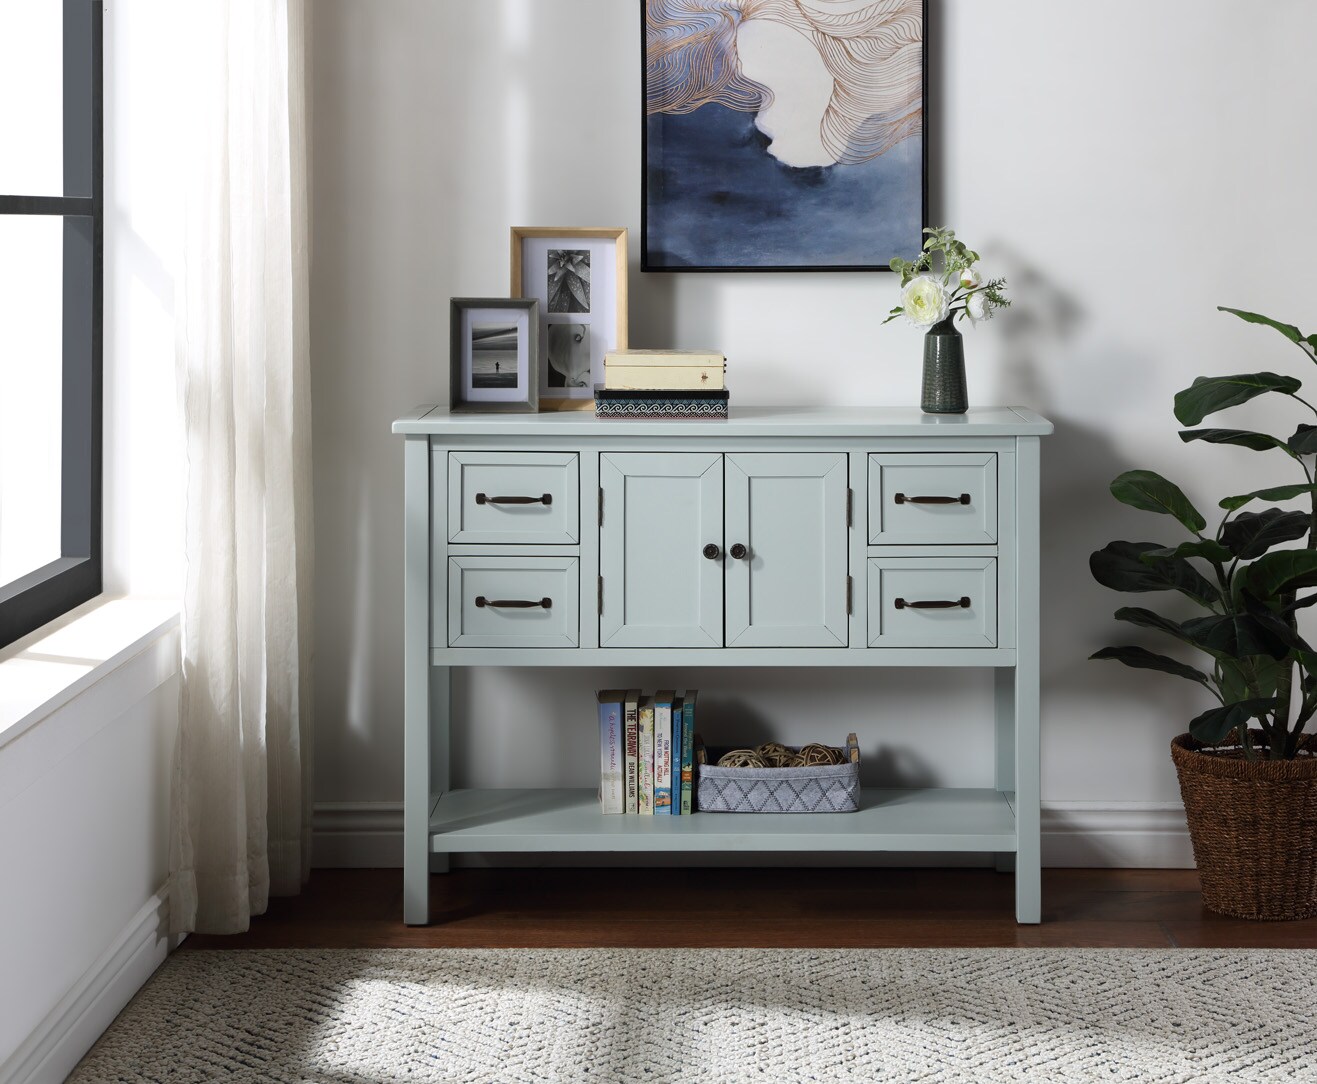 Details about   Antique Blue Console Table Sofa Table w/Storage Drawers Shelf Entryway Sideboard 